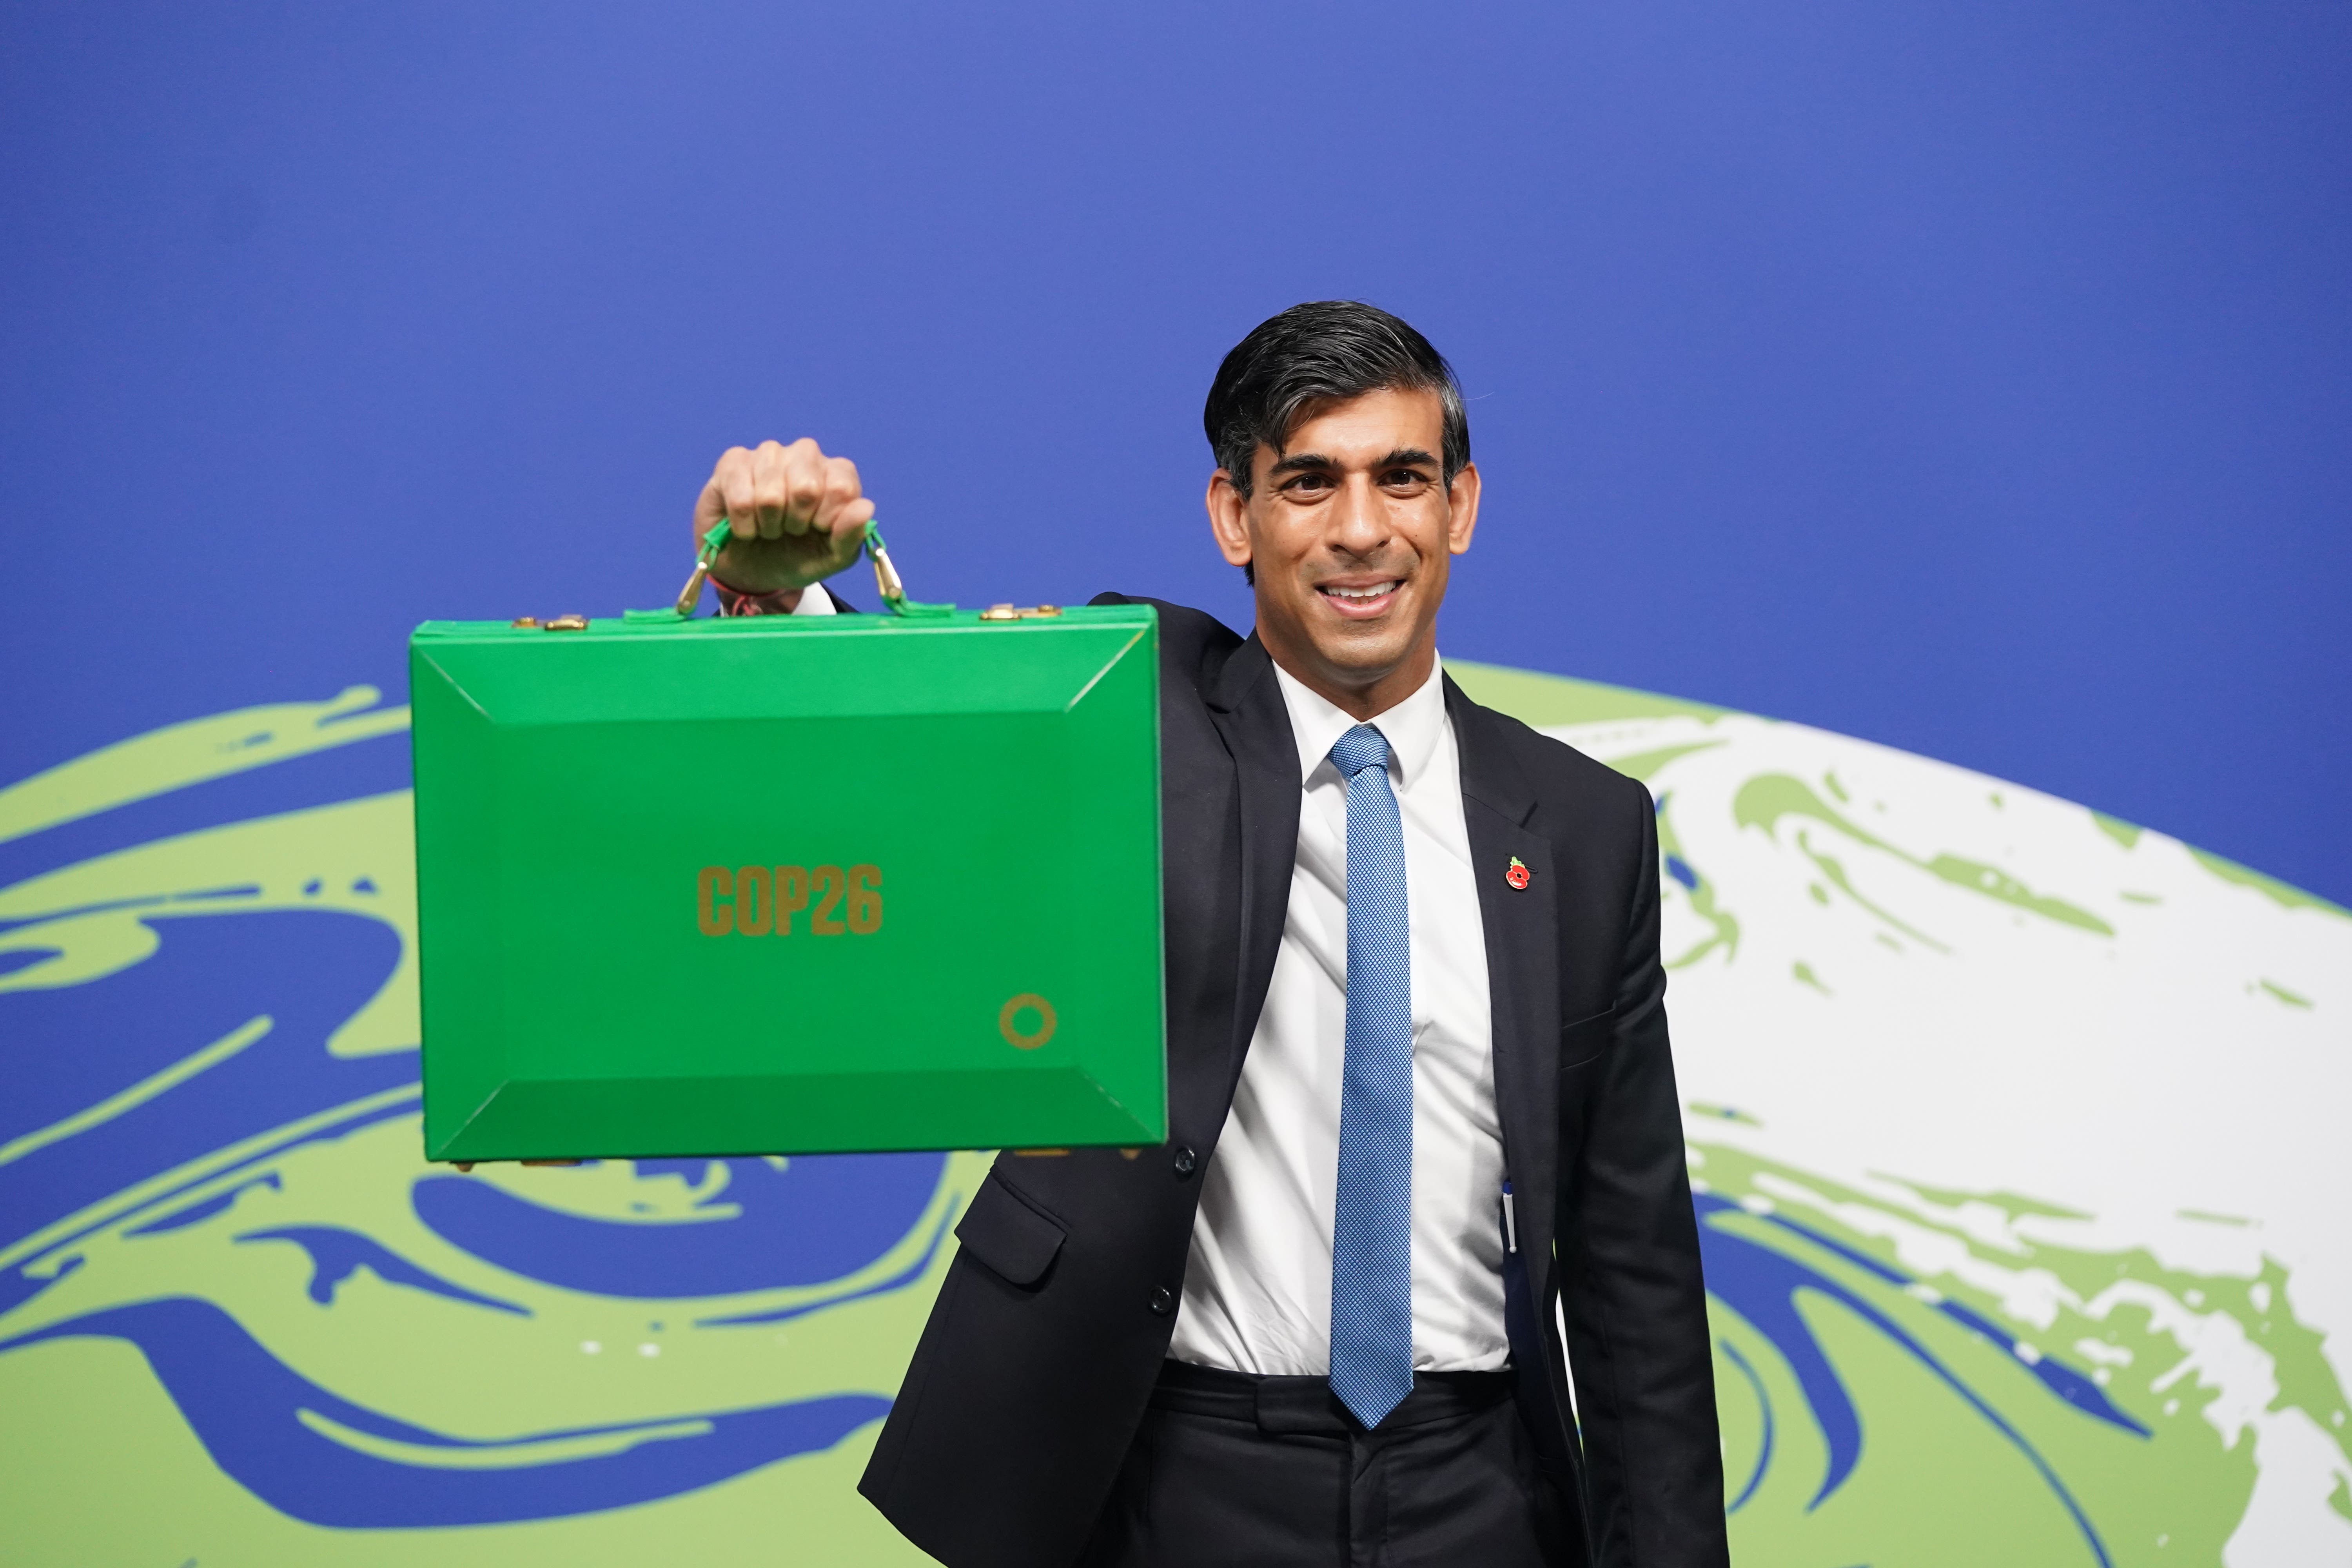 Rishi Sunak backed climate finance projects as chancellor at Cop26, but his commitment to net zero has been questioned since becoming Prime Minister. (Stefan Rousseau/PA)